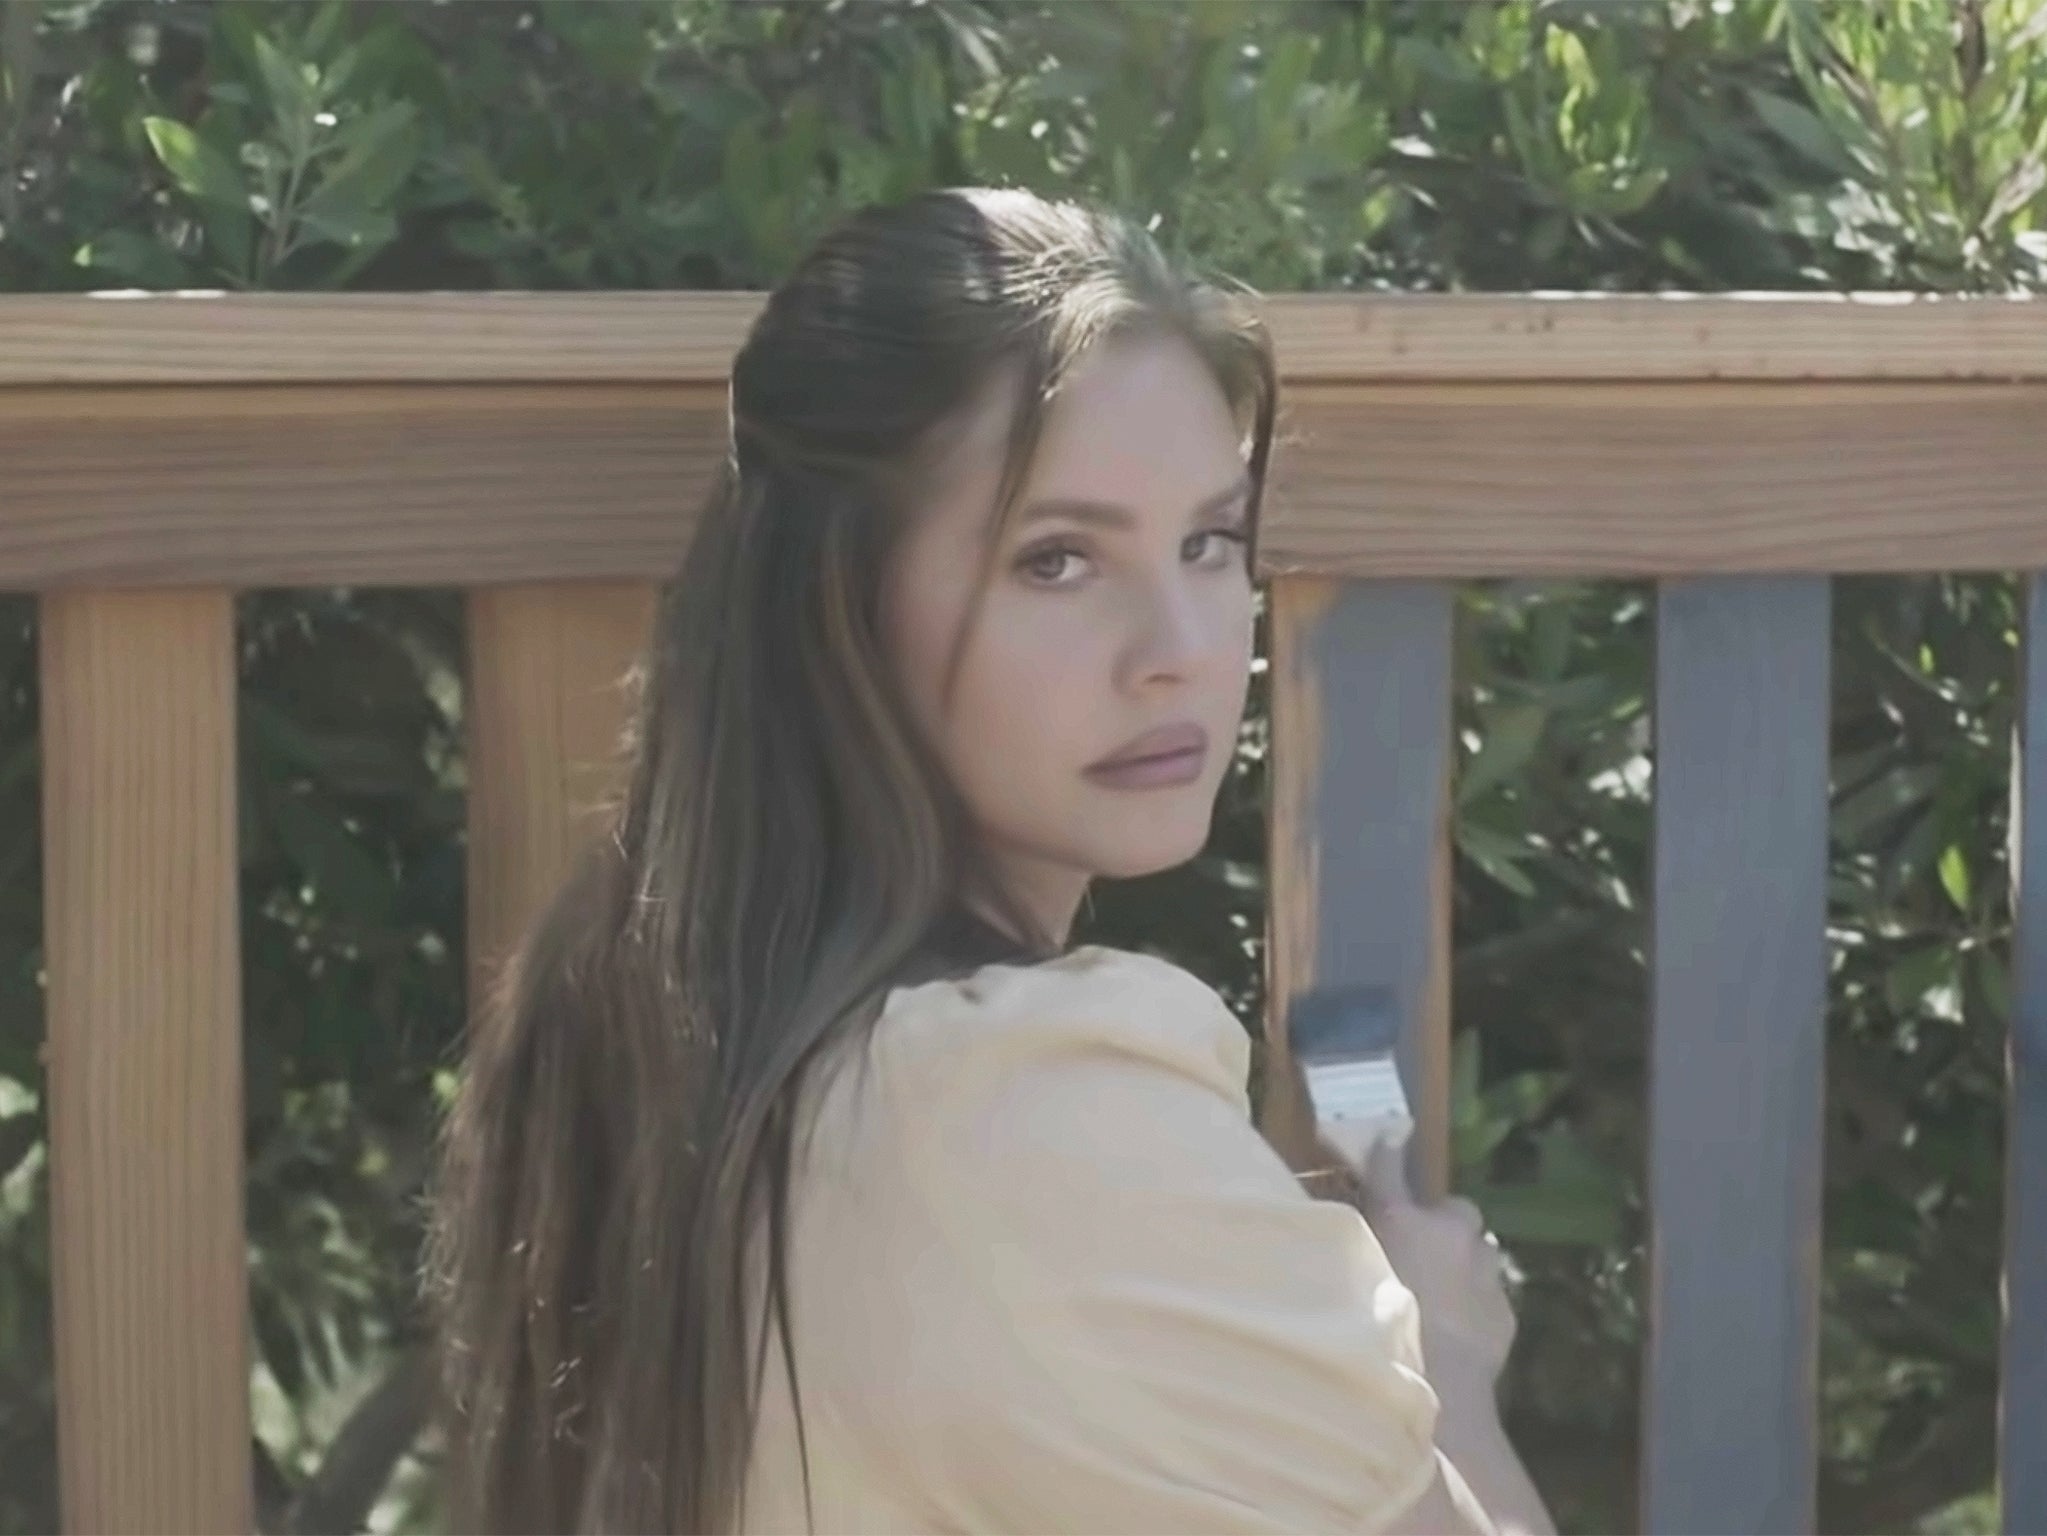 Lana Del Rey in the visualisation for her single ‘Blue Banisters’